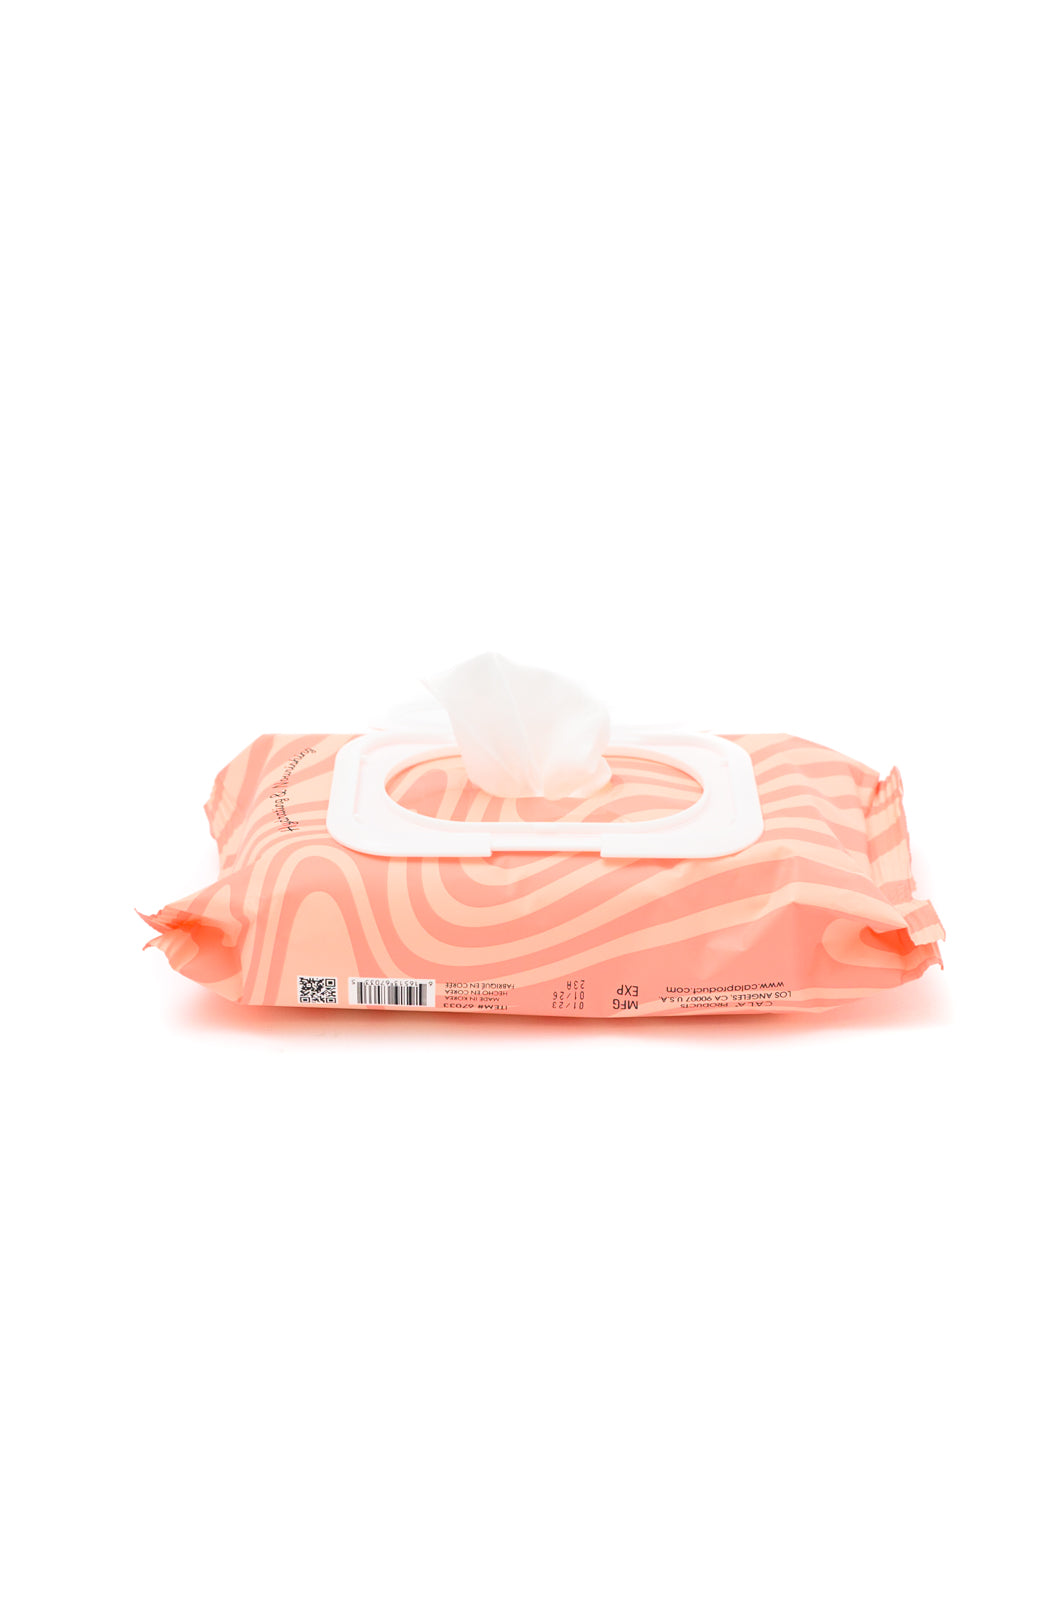 Makeup Remover Wipes Hyaluronic Acid - 7/10/2023